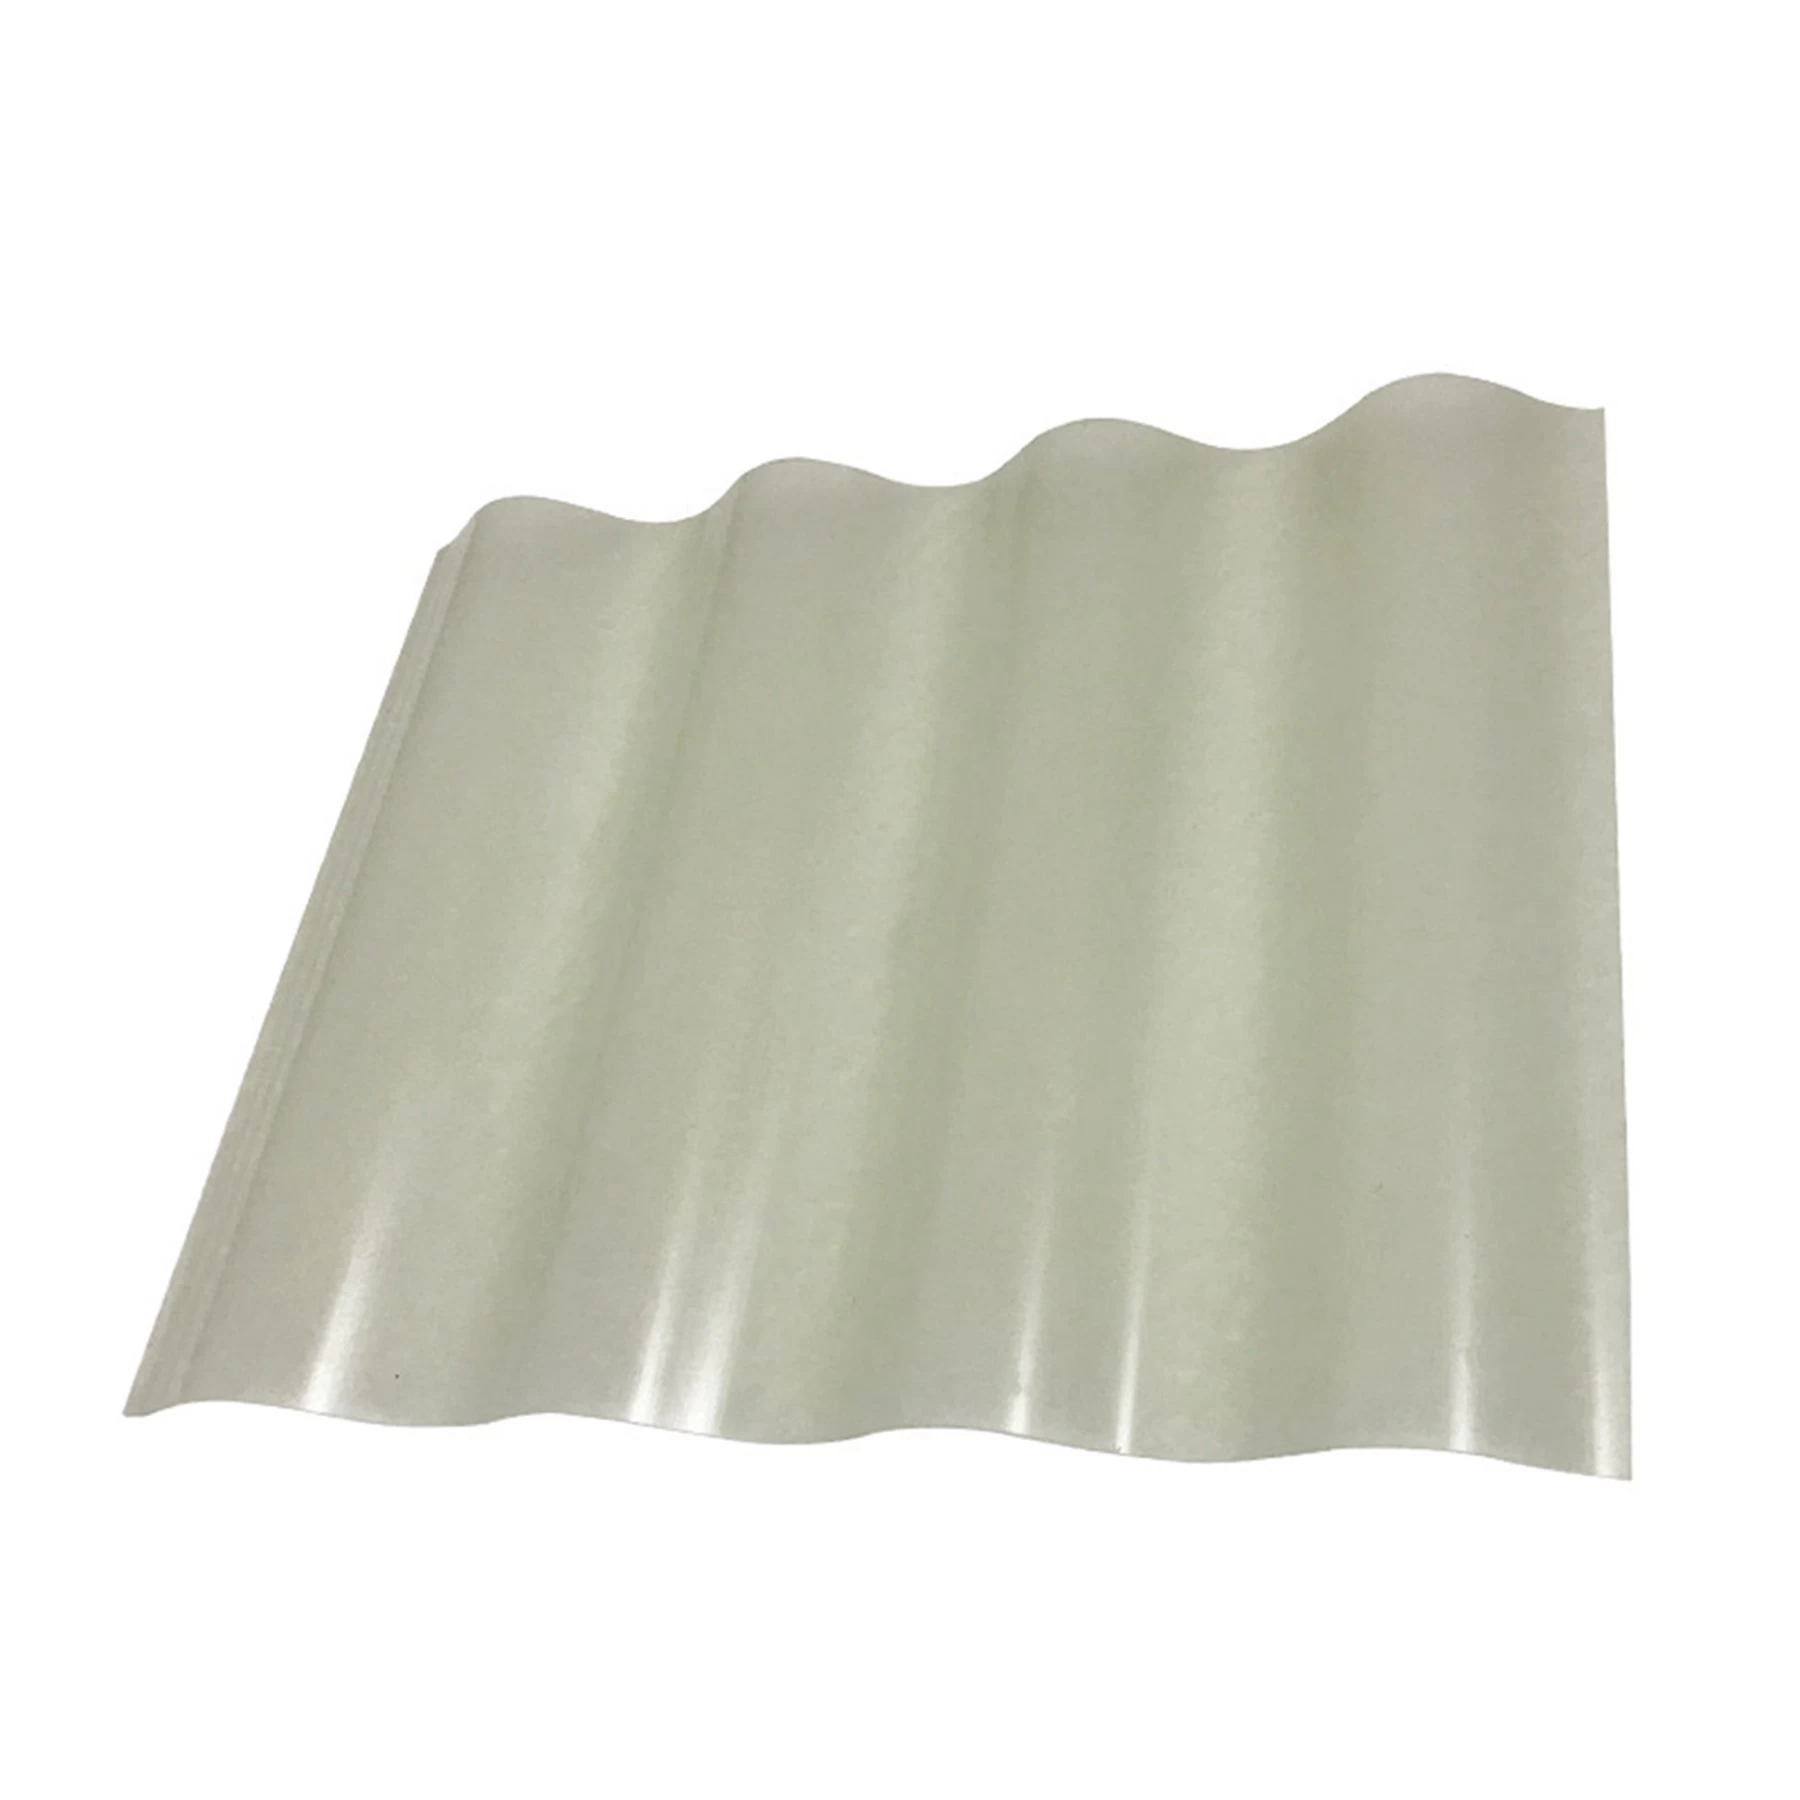 ZXC Long life low cost in China light weight PVC plastic translucent roofing sheet